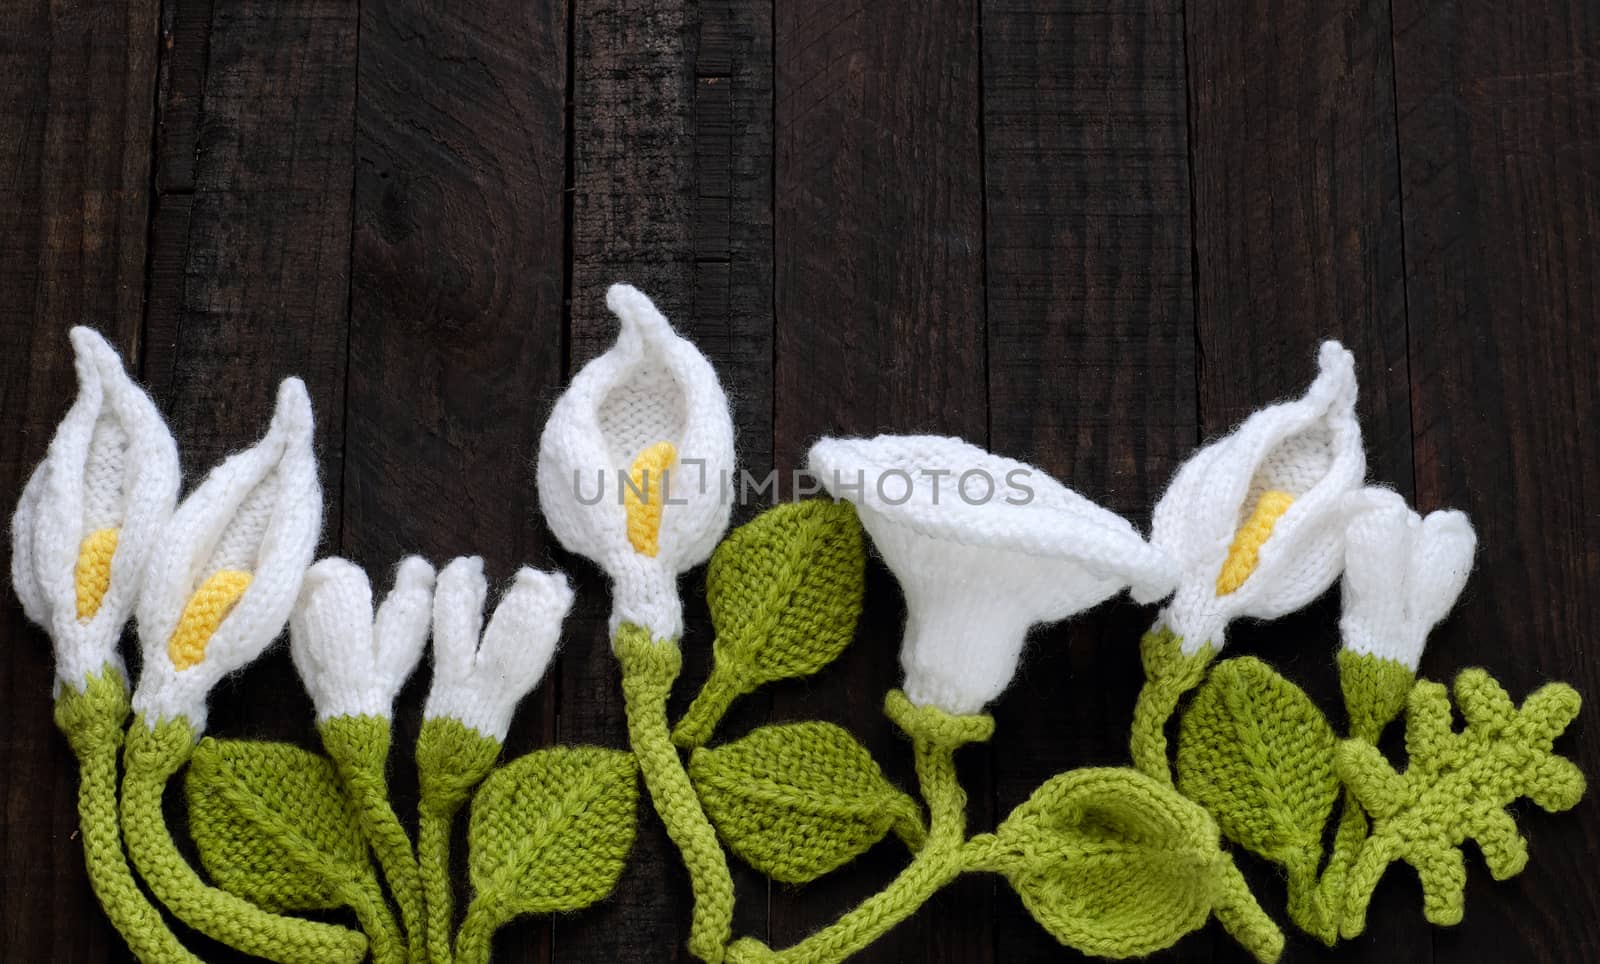  knitted green leaf and white flower background by xuanhuongho